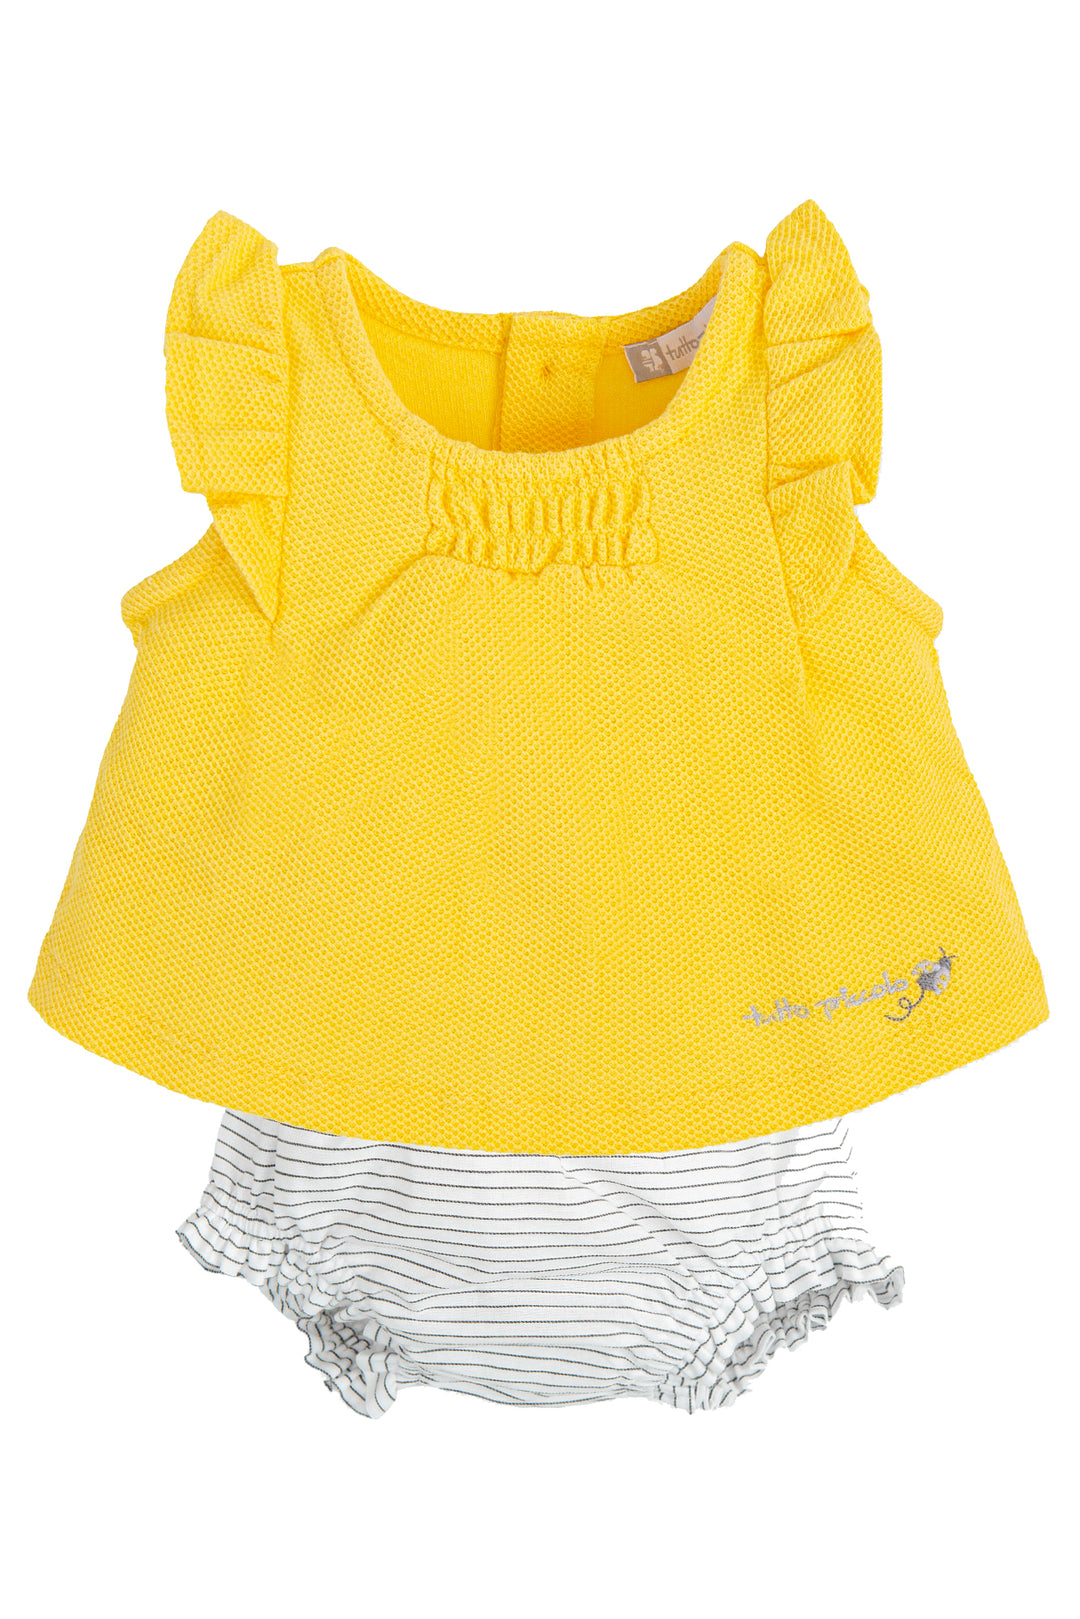 Tutto Piccolo "Pamela" Yellow Top & Striped Bloomers | Millie and John